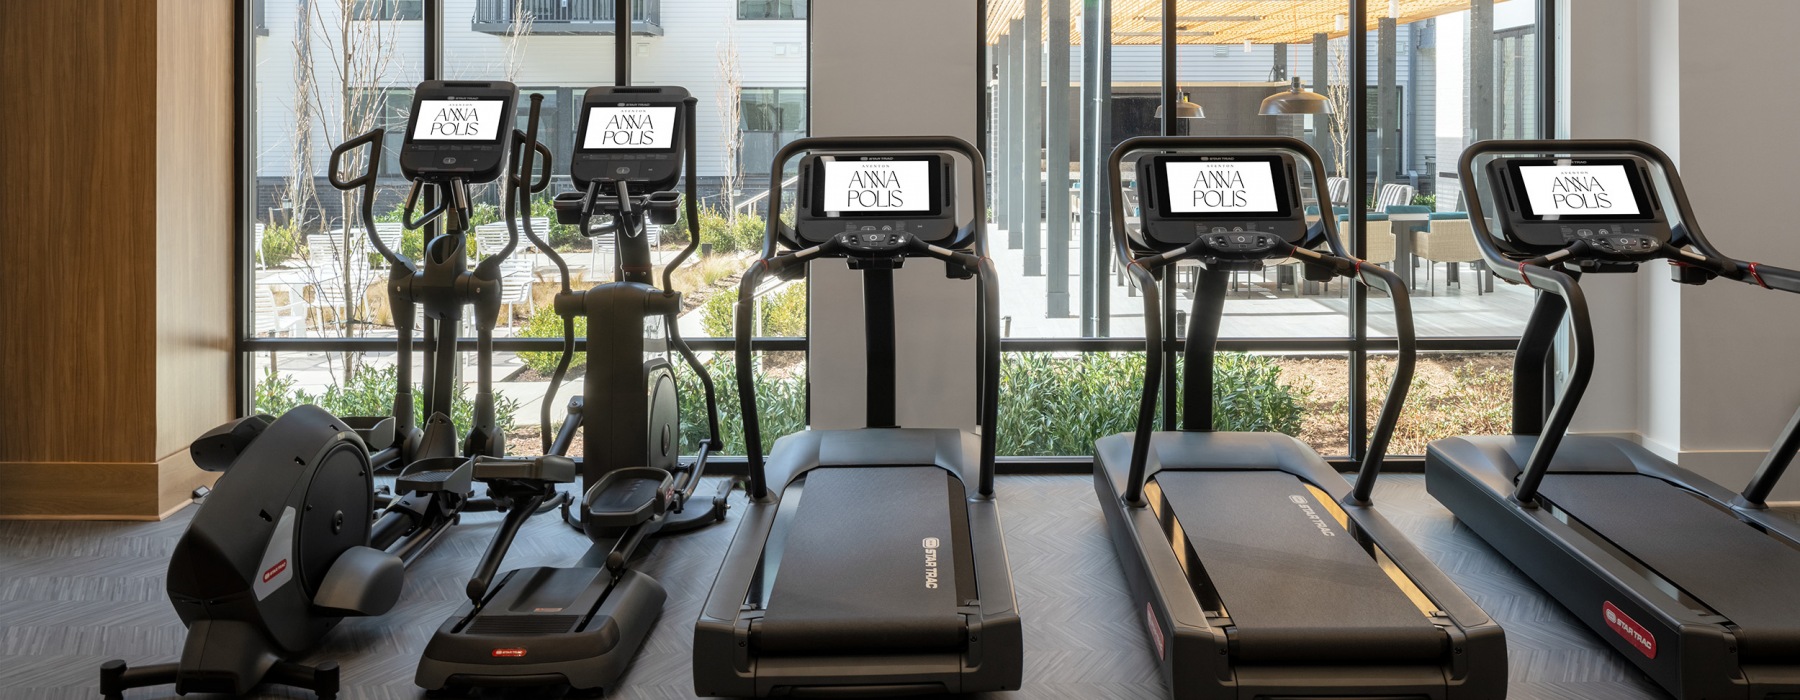 Large windows with ample natural lighting in Aventon Annapolis' community fitness center